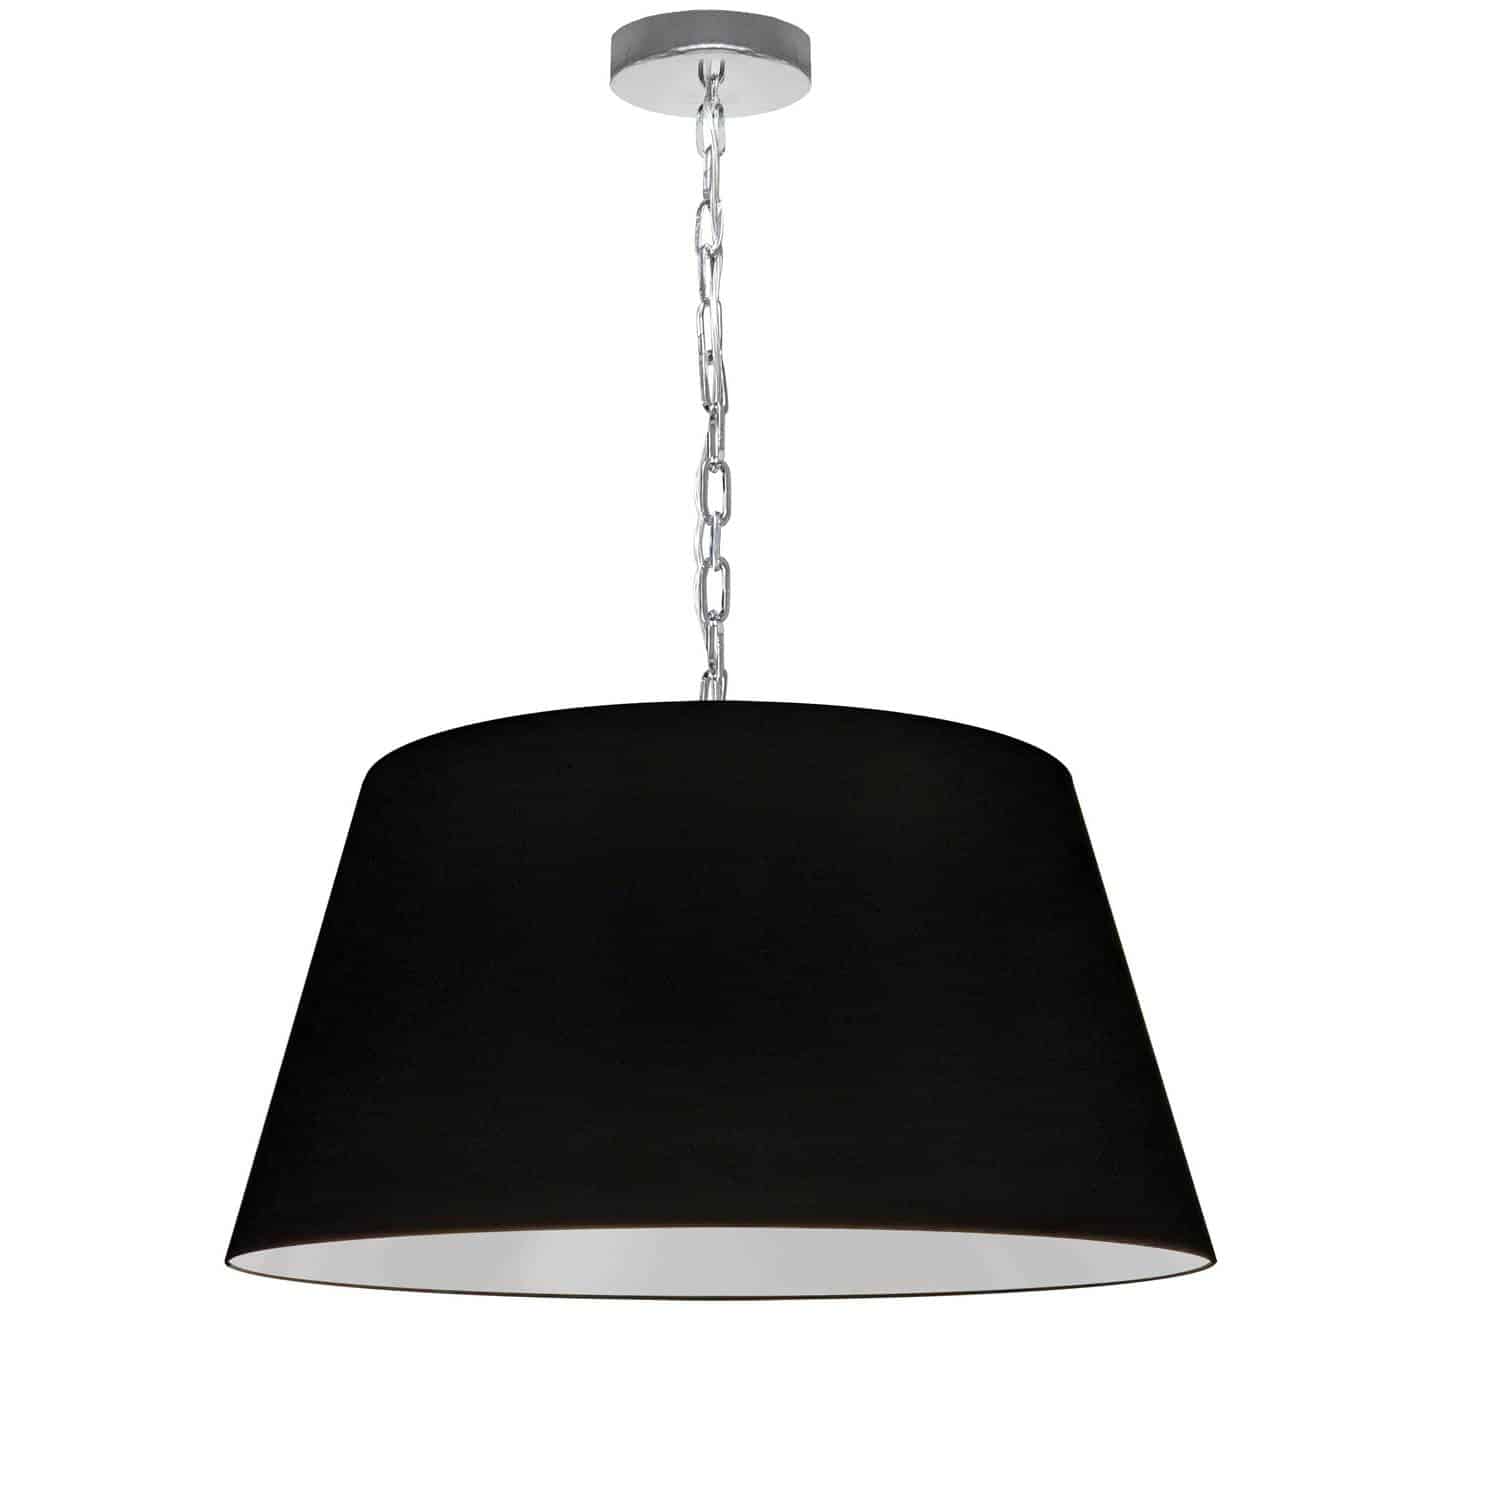 A chic silhouette adds a touch of Parisian style couture to your home with the Brynn family of lighting. An elegant drop, and luxury materials, give it an upscale allure that will blend into modern or transitional furnishings. A chain drop ends in a metal frame, with a tapered drum style two-sided shade. The fabric shade and frame come in a variety of colorway combinations, from complementary to dramatic contrasts. Simple, yet substantial, Brynn lighting comes in a range of sizes to fit most rooms of your home, including a great room or large foyer.